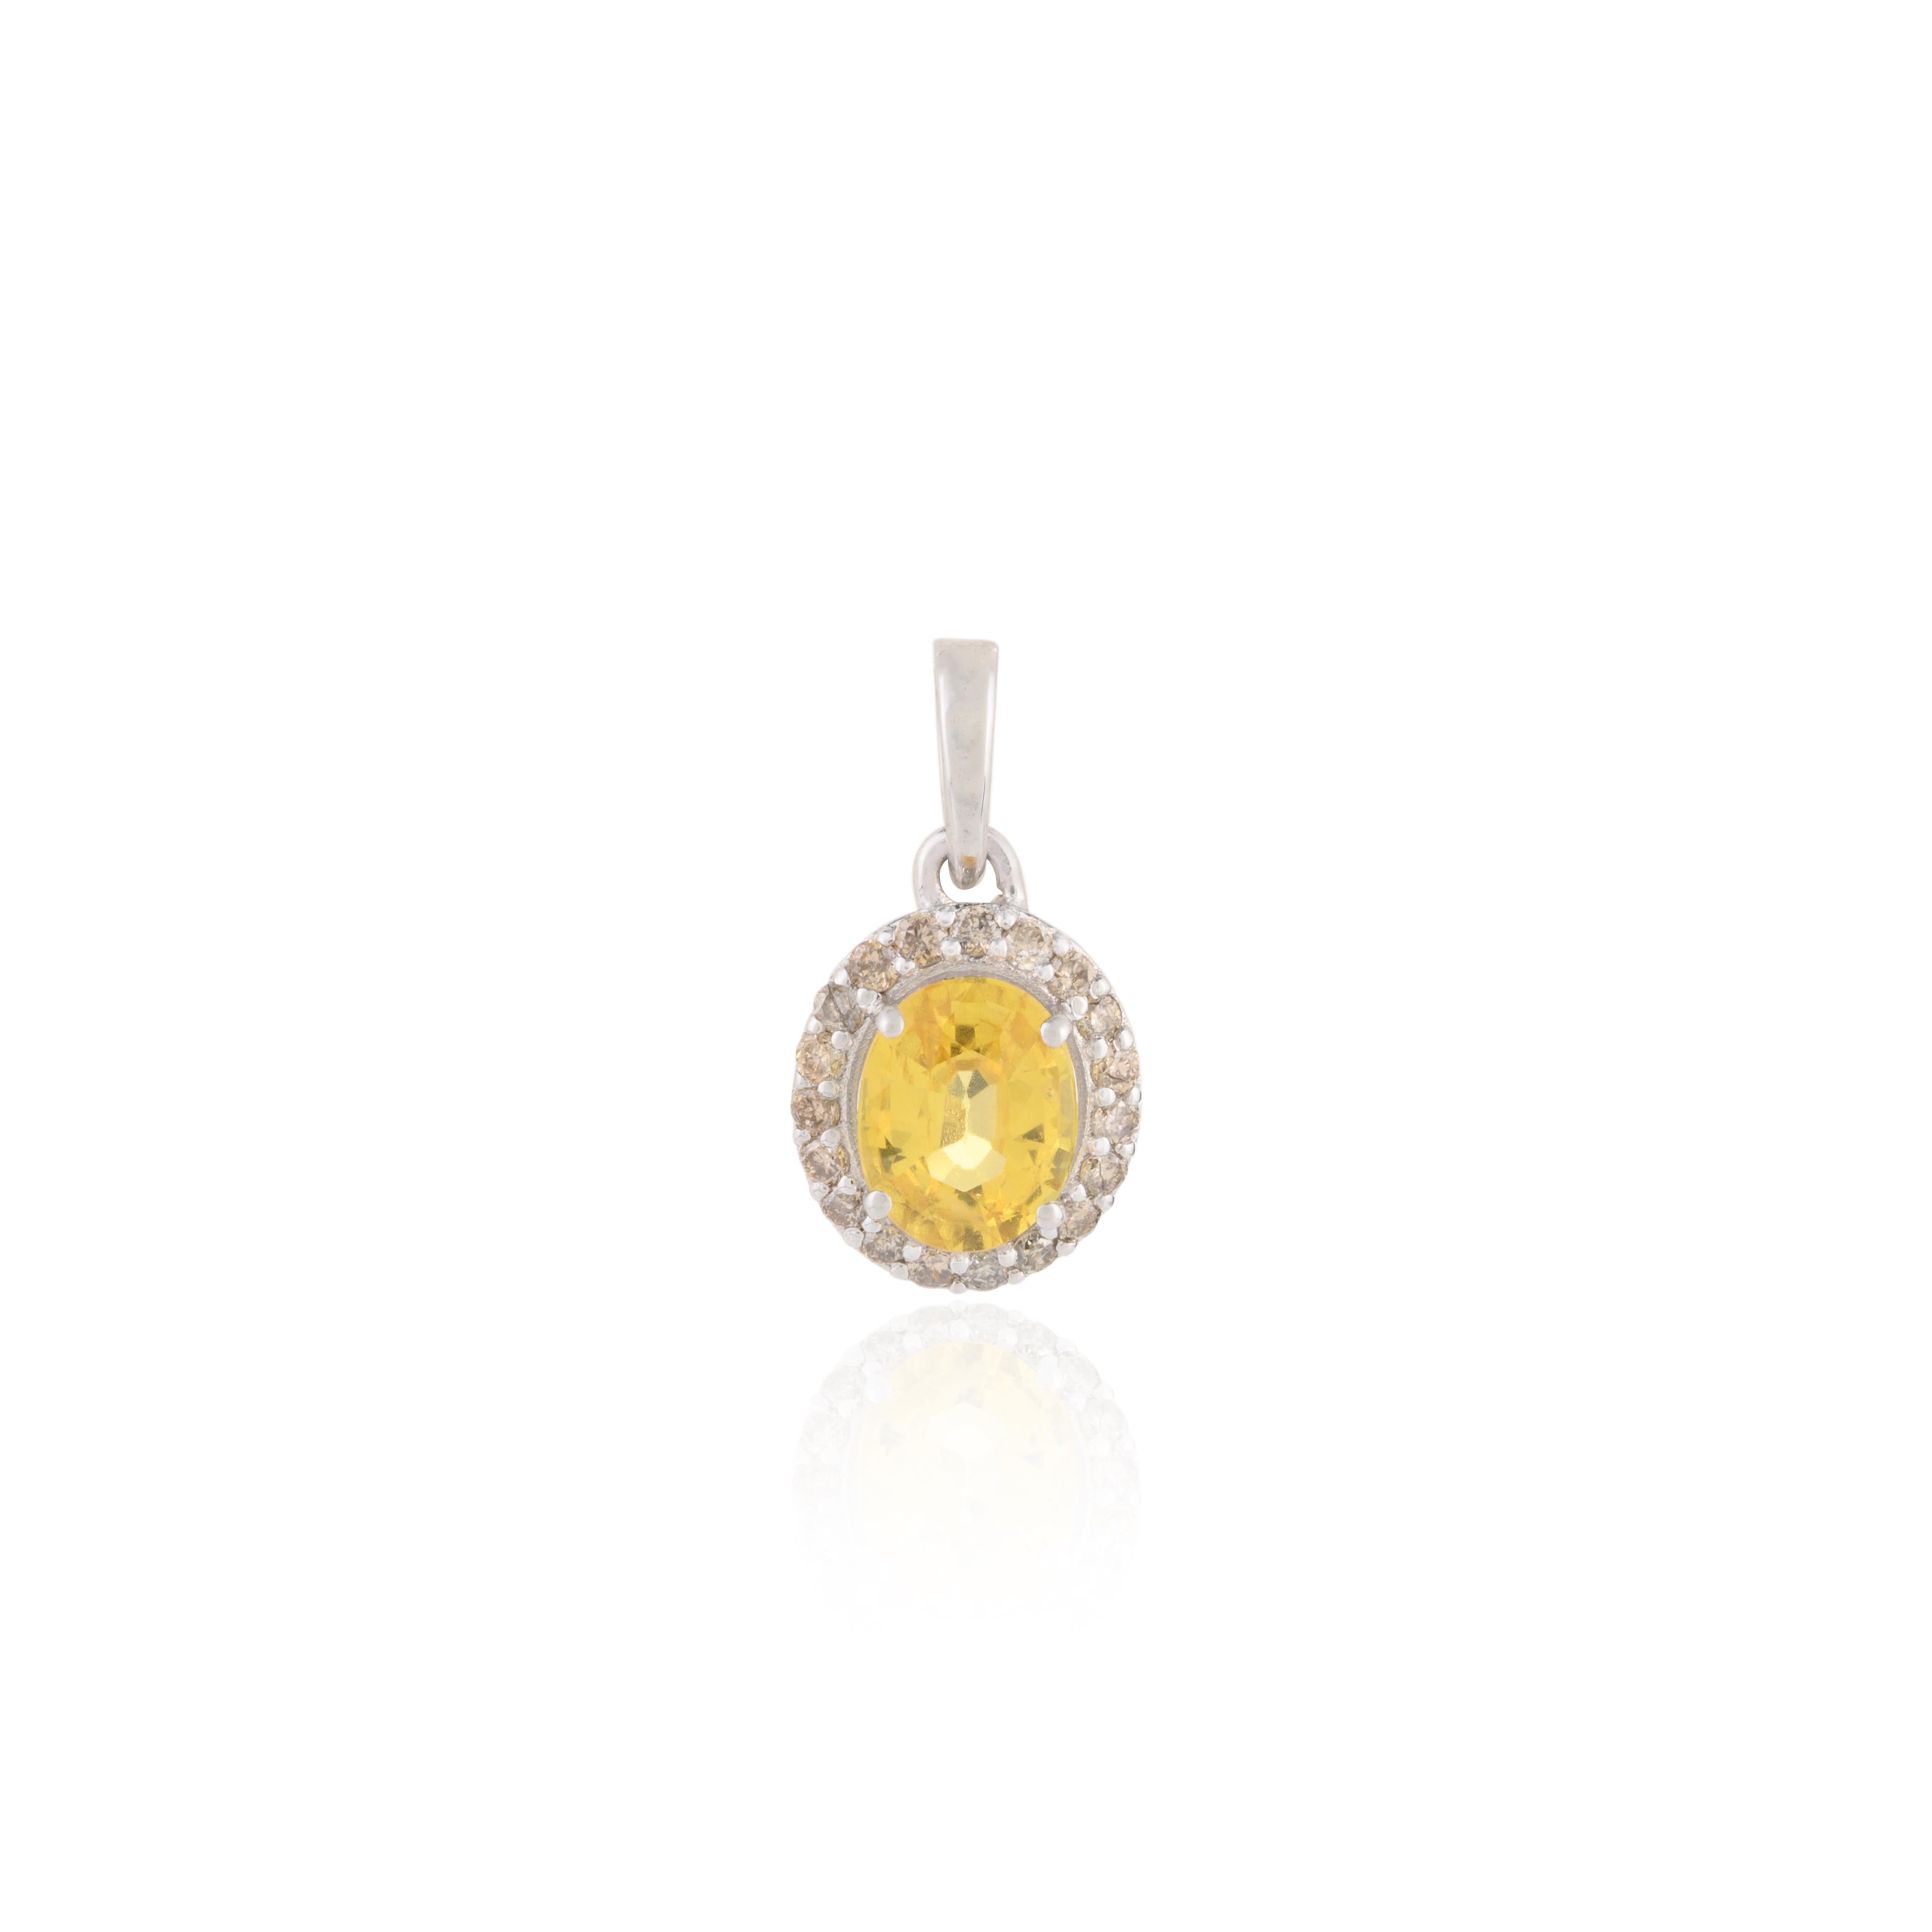 For Sale:  18k White Gold Yellow Sapphire Halo Diamond Ring and Pendant Jewelry Set for Her 13